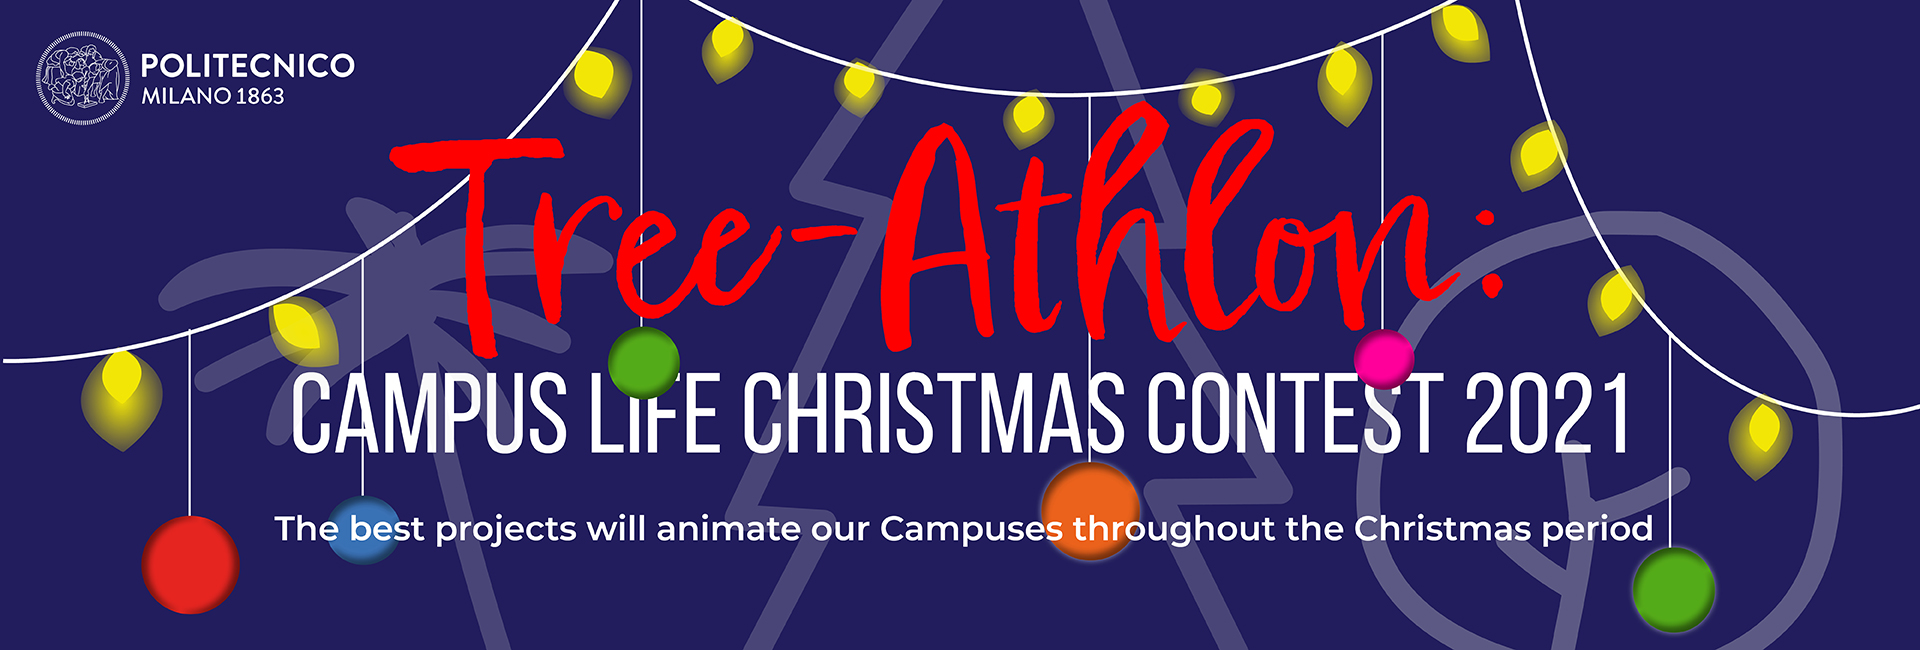 Tree-Athlon: Campus Life Christmas Contest 2021 - The best projects will animate our Campuses throughout the Christmas period